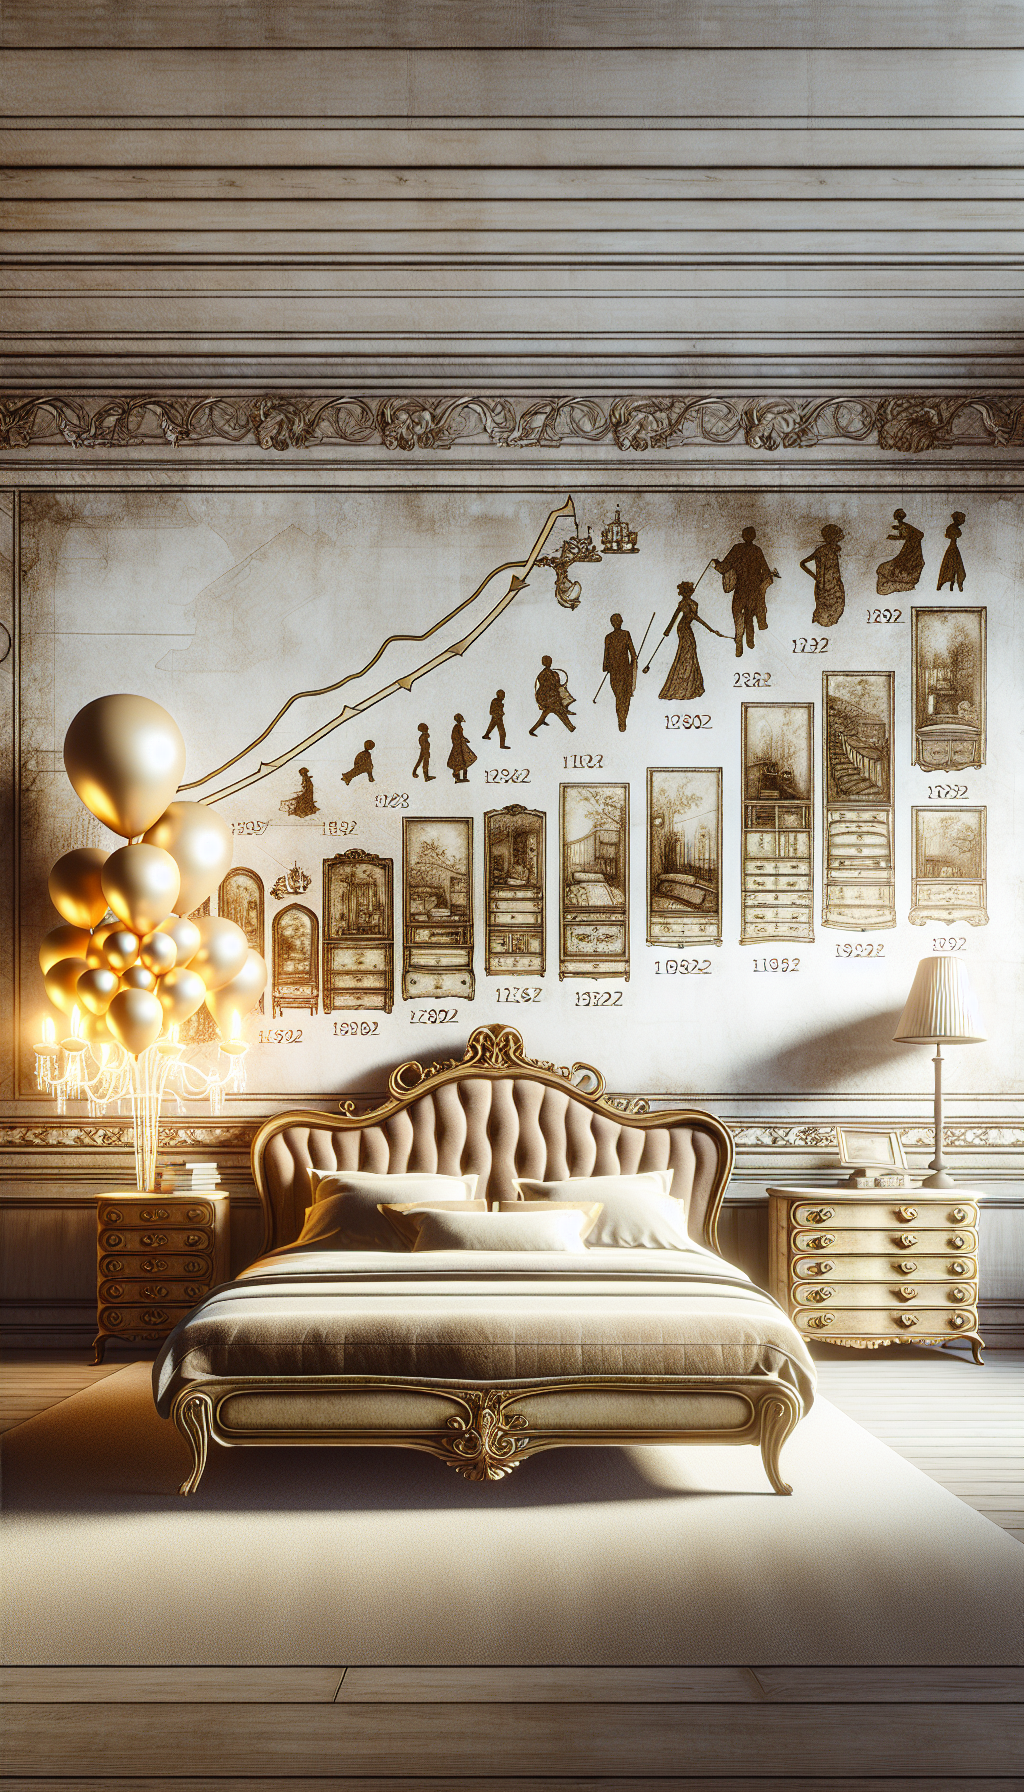 An elegant room showcasing a timeline wall with framed silhouettes of antique bedroom sets morphing from past to present. In the foreground, a lavish set glows, its value highlighted by soaring, golden price tag balloons. Decorative arrows direct the eye, subtly implying the trends and demand flow across epochs. The art style blends vintage etching with modern minimalistic lines for contrast.